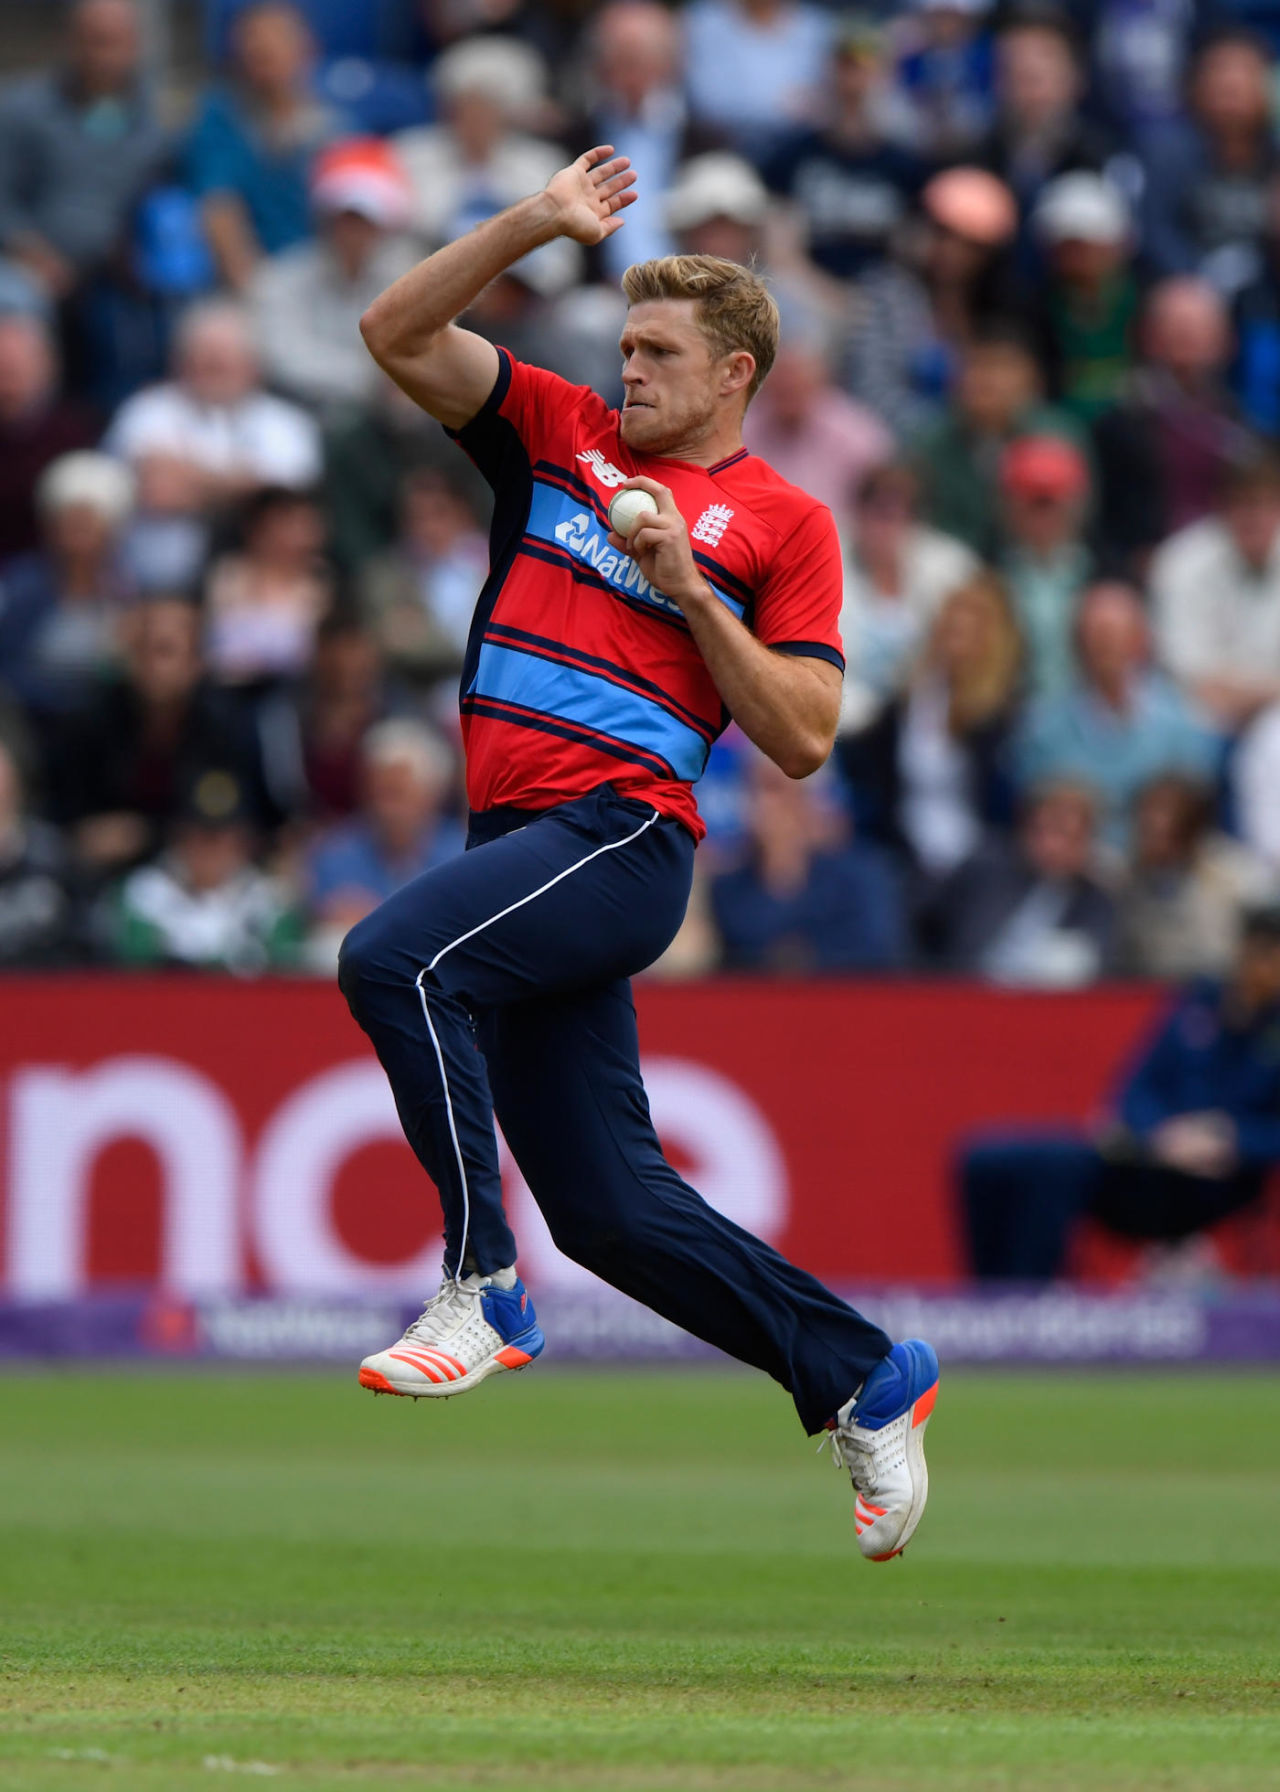 David Willey in action for England, England vs South Africa, June 25, 2017